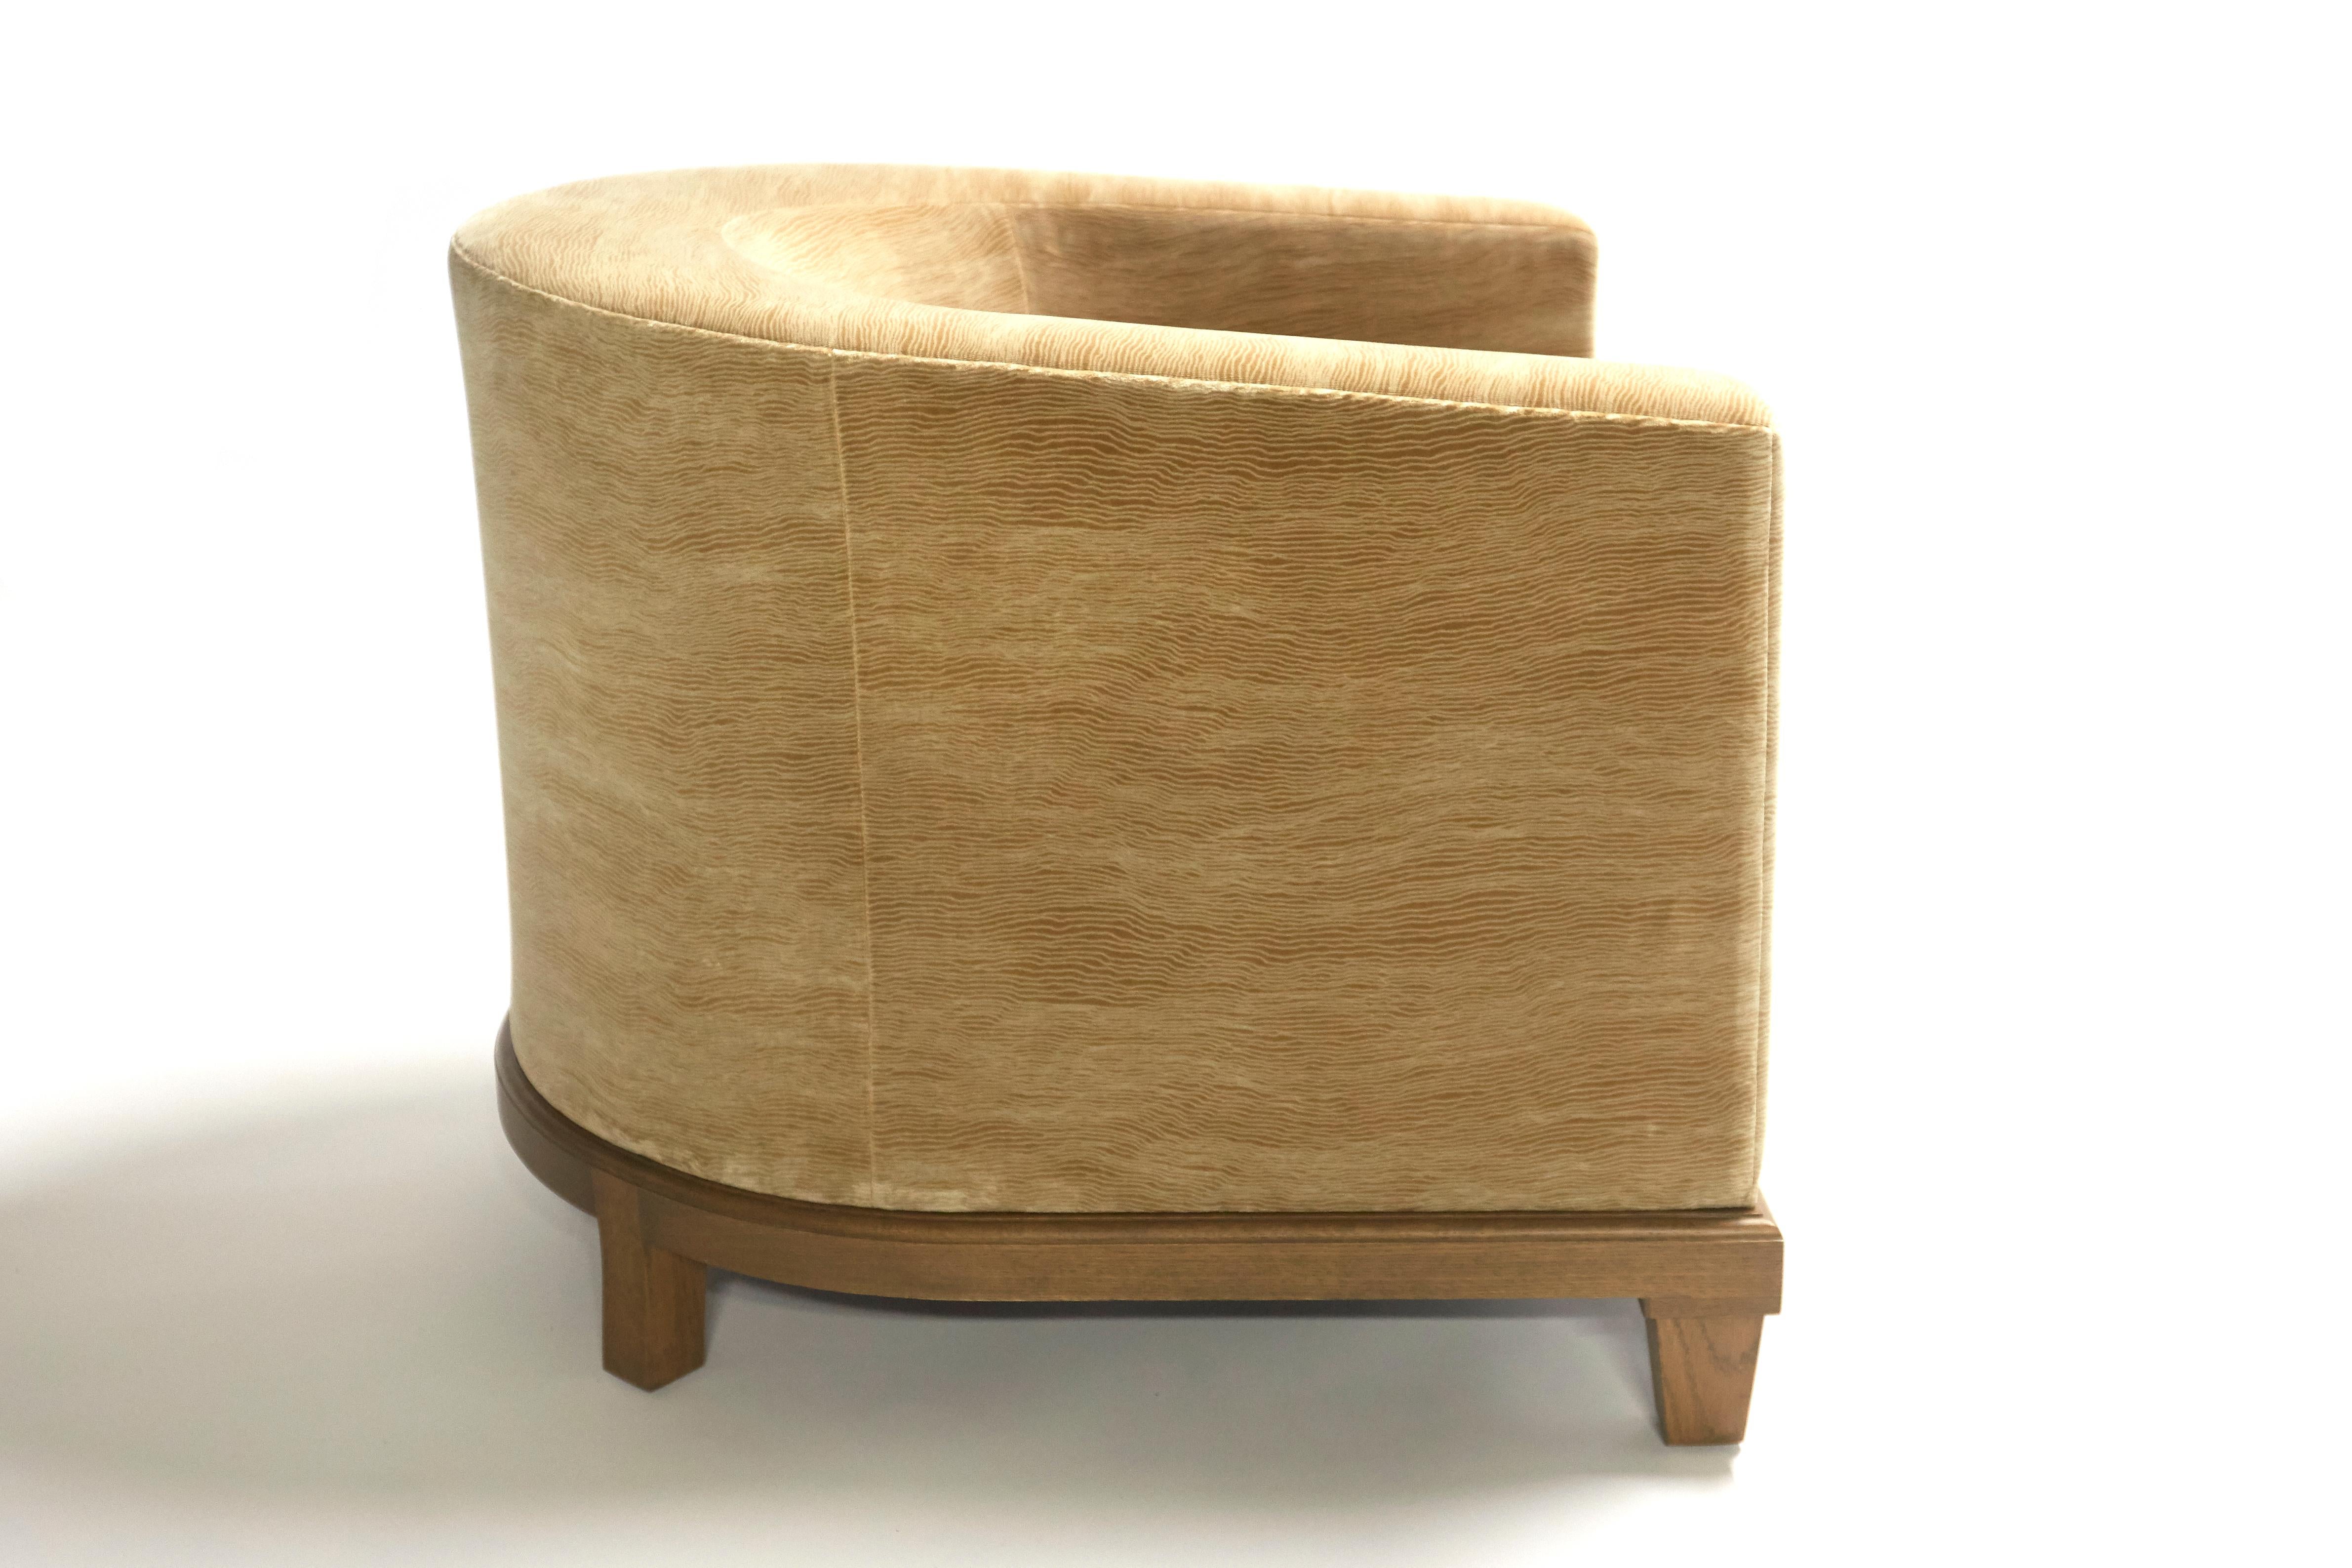 Curved, tight back lounge chair with loose seat cushion for maximum comfort and support. The Madison Chair frame is constructed using solid Maple wood wrapped with high density foam core and down fill. Four finishes available for wooden legs and